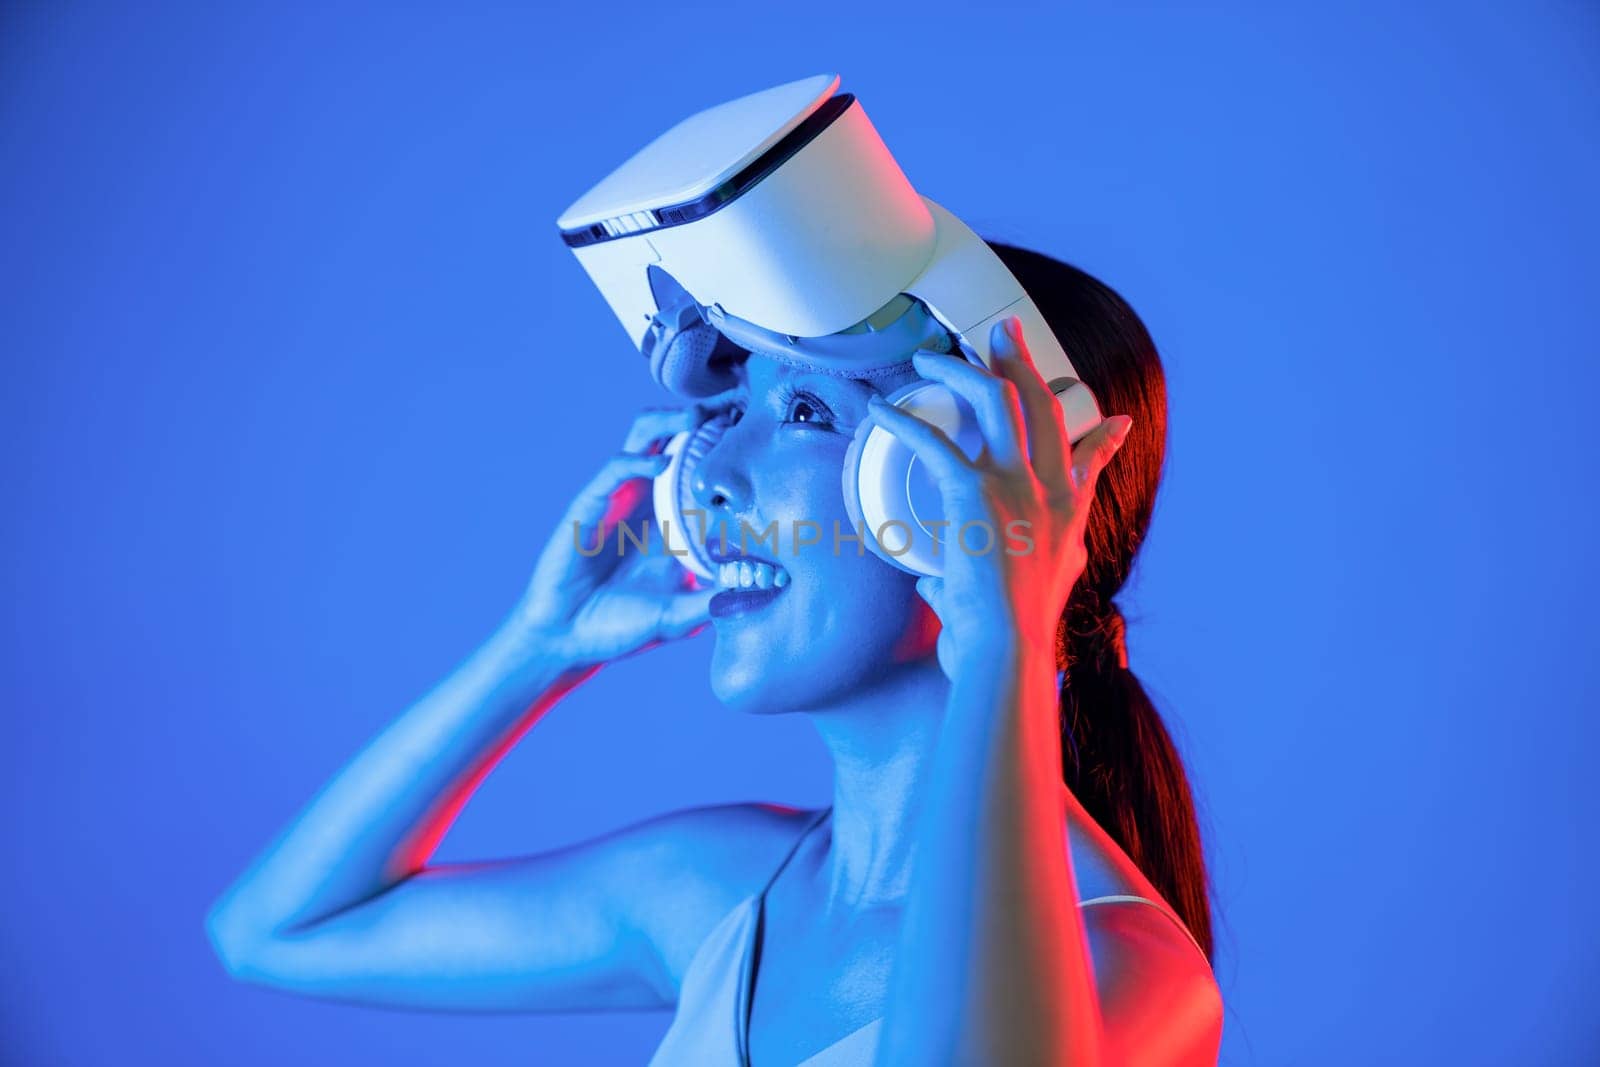 Smart female stand hit by neon light strapping VR headset above eye.The gadget function for connecting metaverse, future cyberspace technology. Woman raise arms holding goggles by hand. Hallucination.